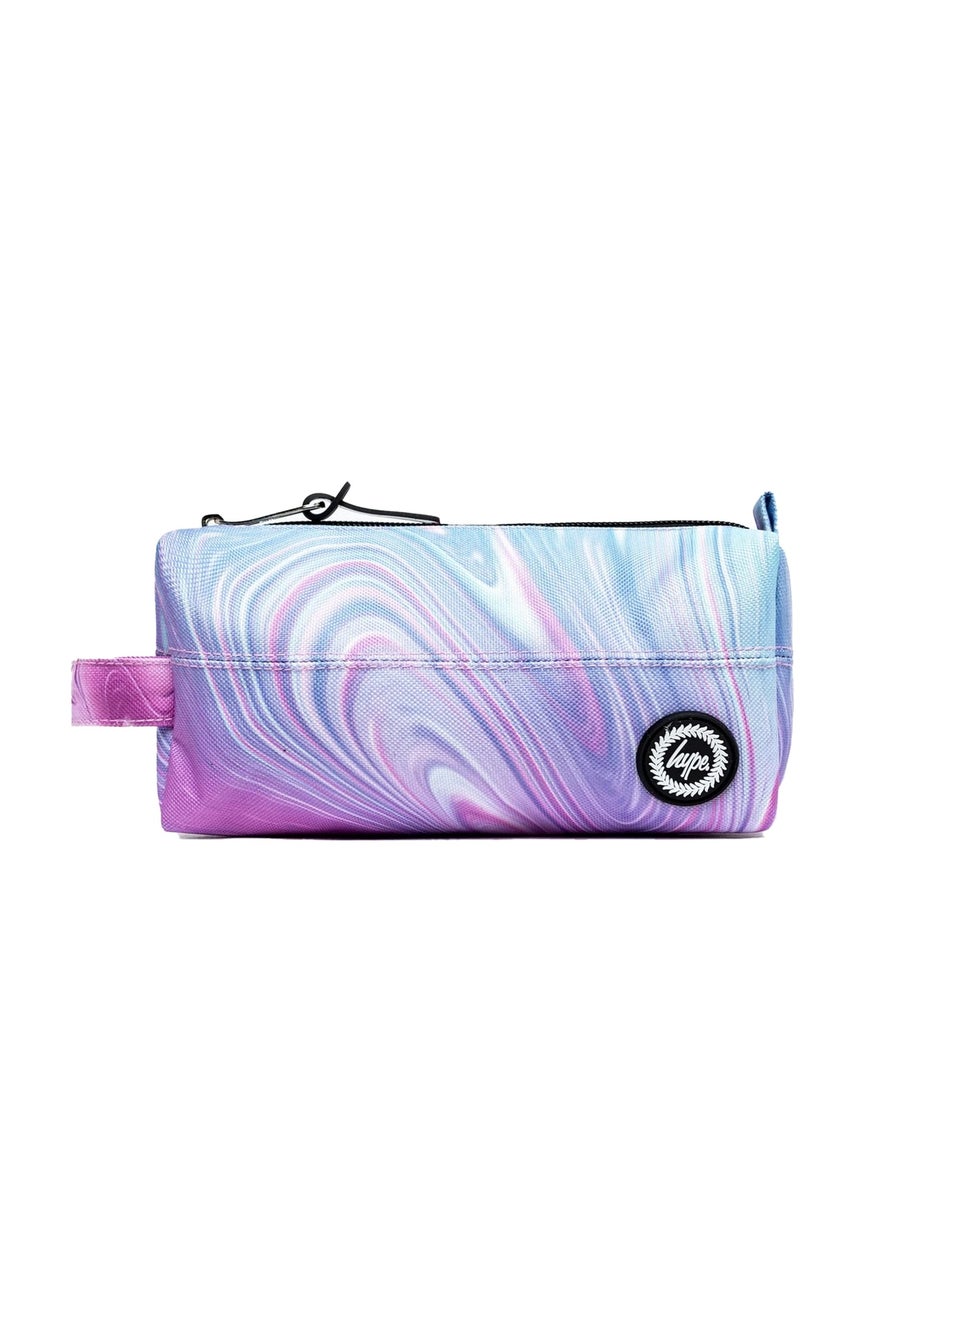 Hype Teal Marble Crest Pencil Case